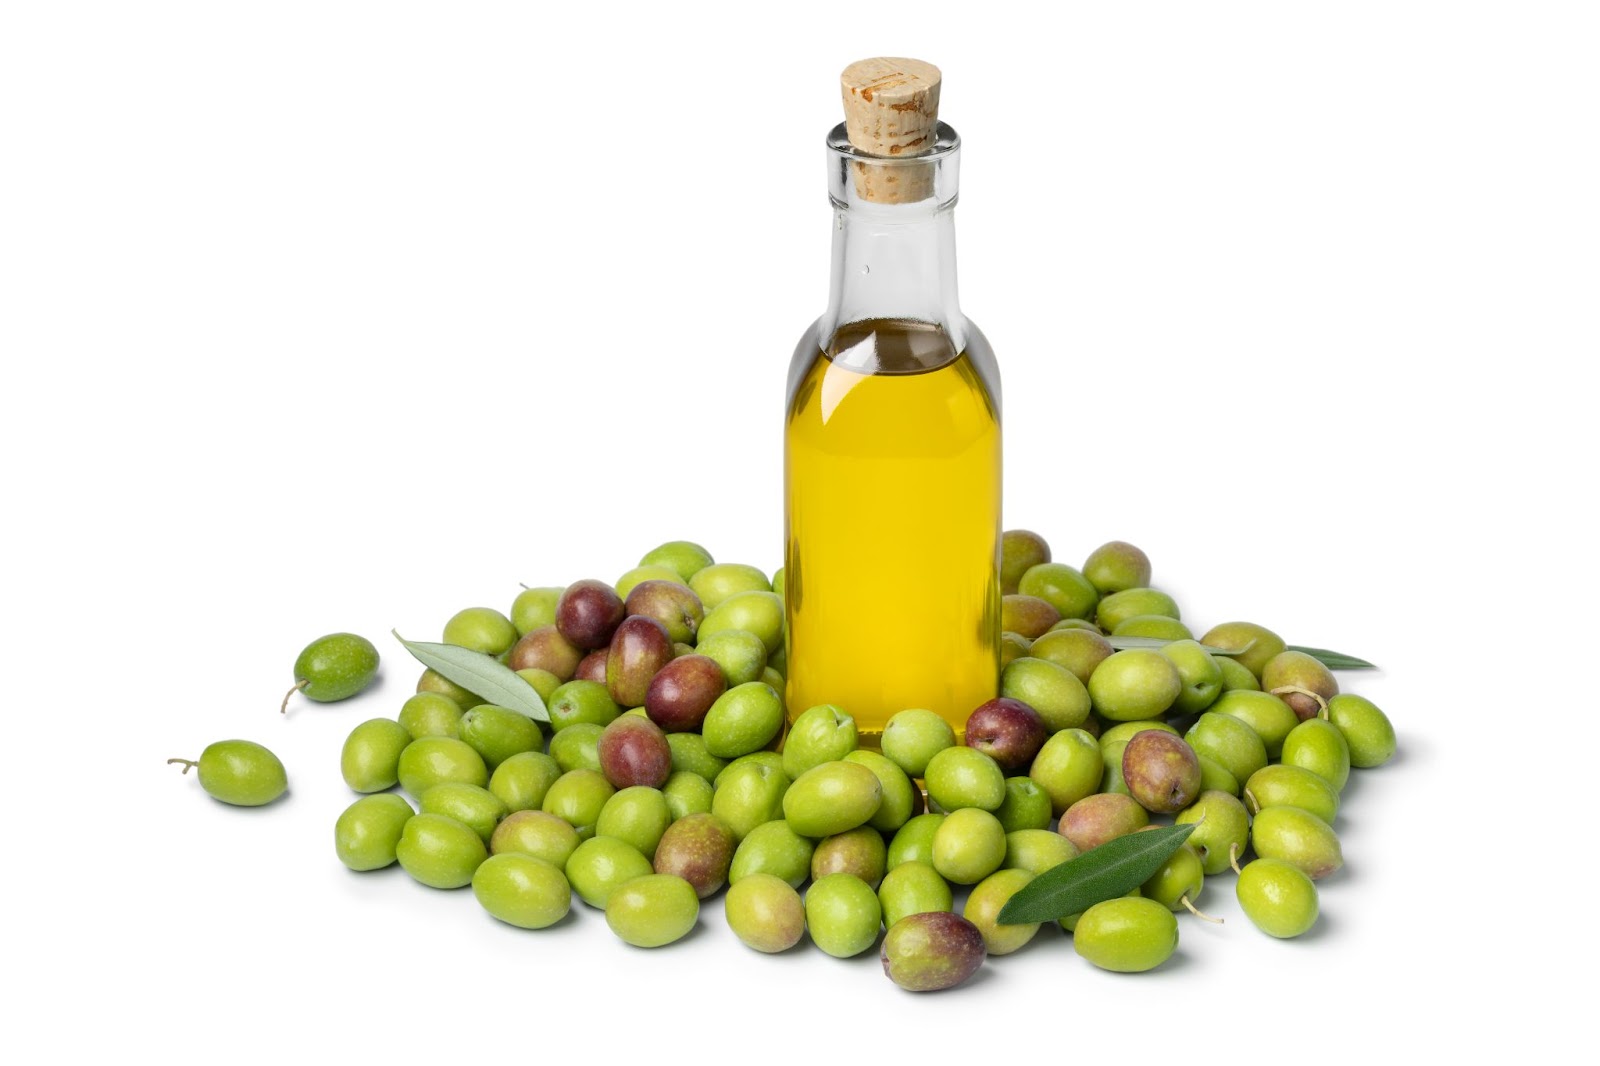 <p>Extra virgin olive oil, a golden elixir celebrated for its exquisite flavor, is much more than a culinary delight. It is a nutritional powerhouse, brimming with heart-healthy monounsaturated fats and potent antioxidants that offer a myriad of health benefits.</p> <p>Among its many treasures, extra virgin olive oil boasts oleuropein, a compound renowned for its anti-inflammatory and neuroprotective properties. This means that incorporating this liquid gold into your diet may not only benefit your heart but also safeguard your brain health. Whether drizzled over salads, used as a flavorful cooking oil, or simply enjoyed with crusty bread, extra virgin olive oil is a delicious and versatile way to elevate your meals and nourish your body.</p>